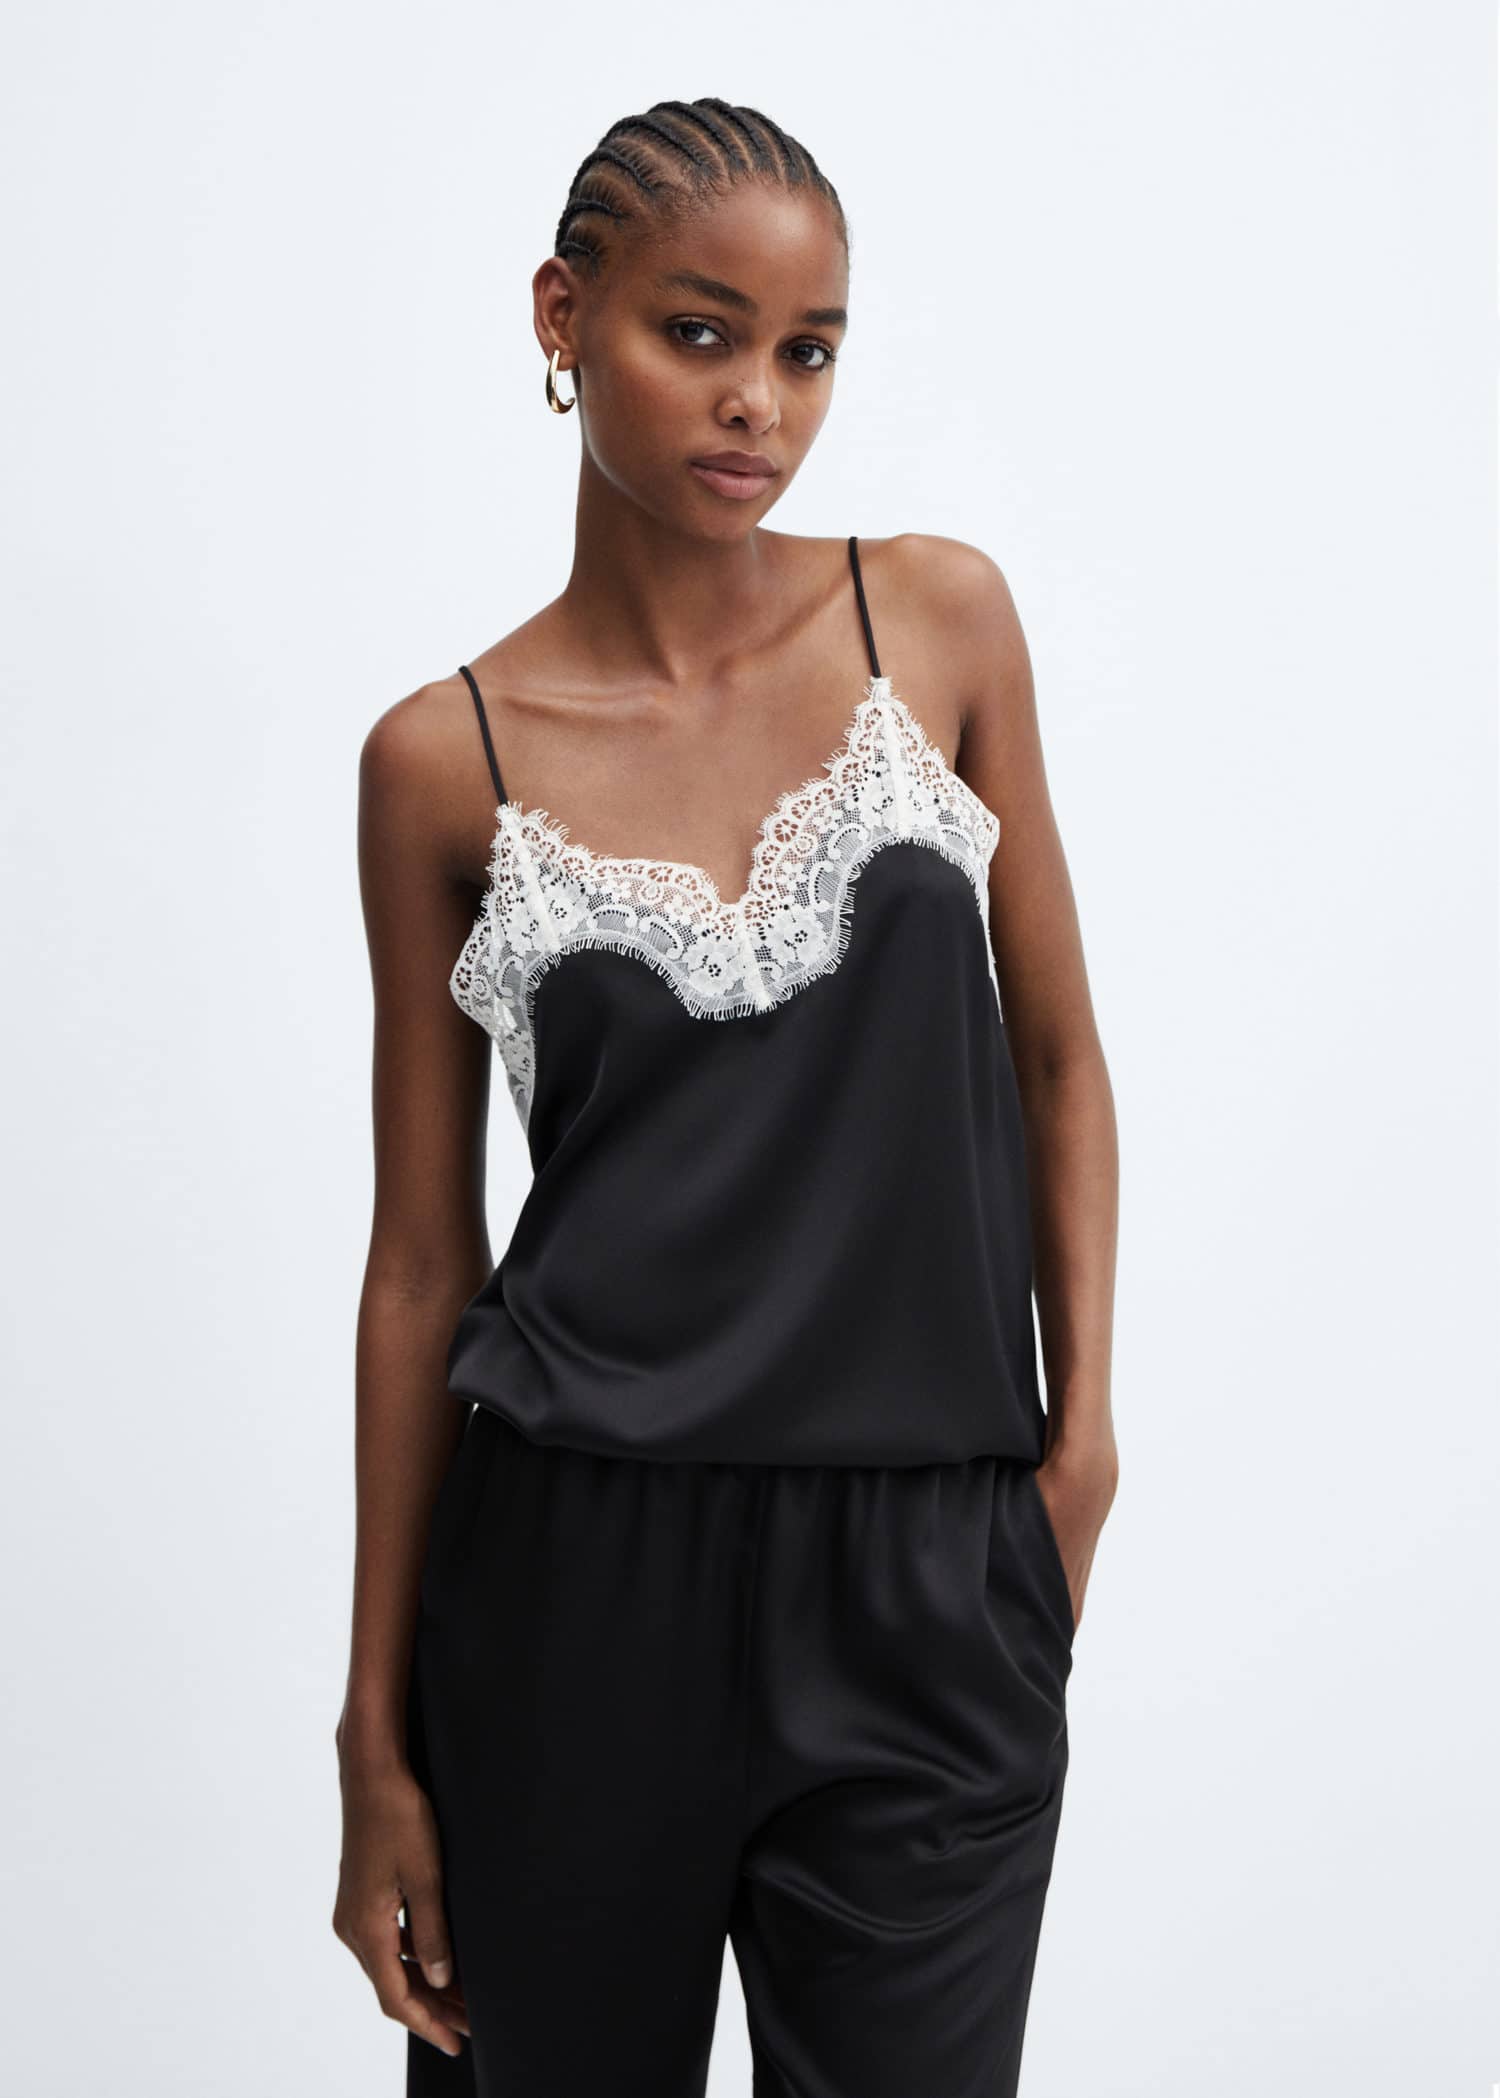 Lingerie top with lace neckline